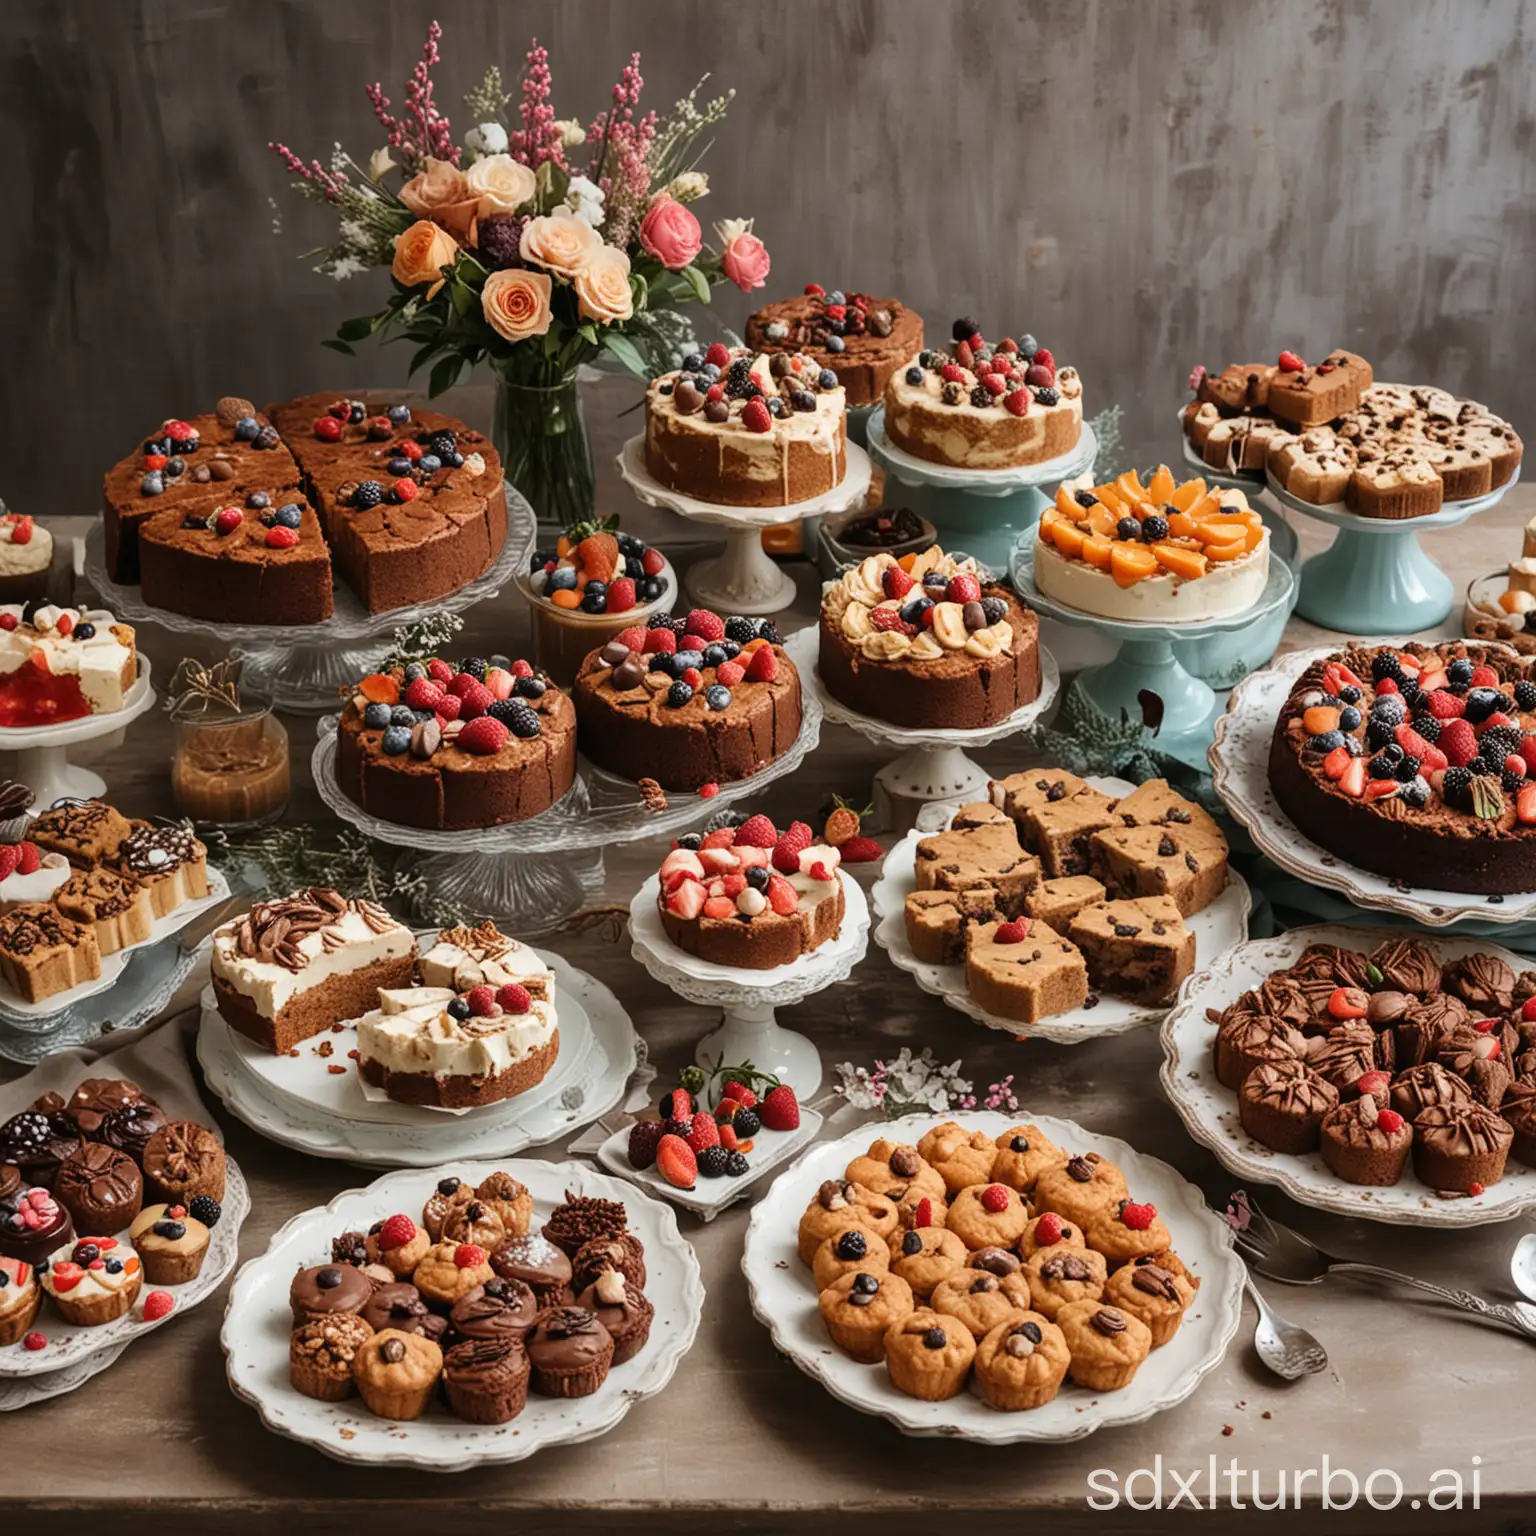 Assorted-SugarFree-Desserts-Delightful-Cakes-Cookies-and-Brownies-Displayed-on-Table